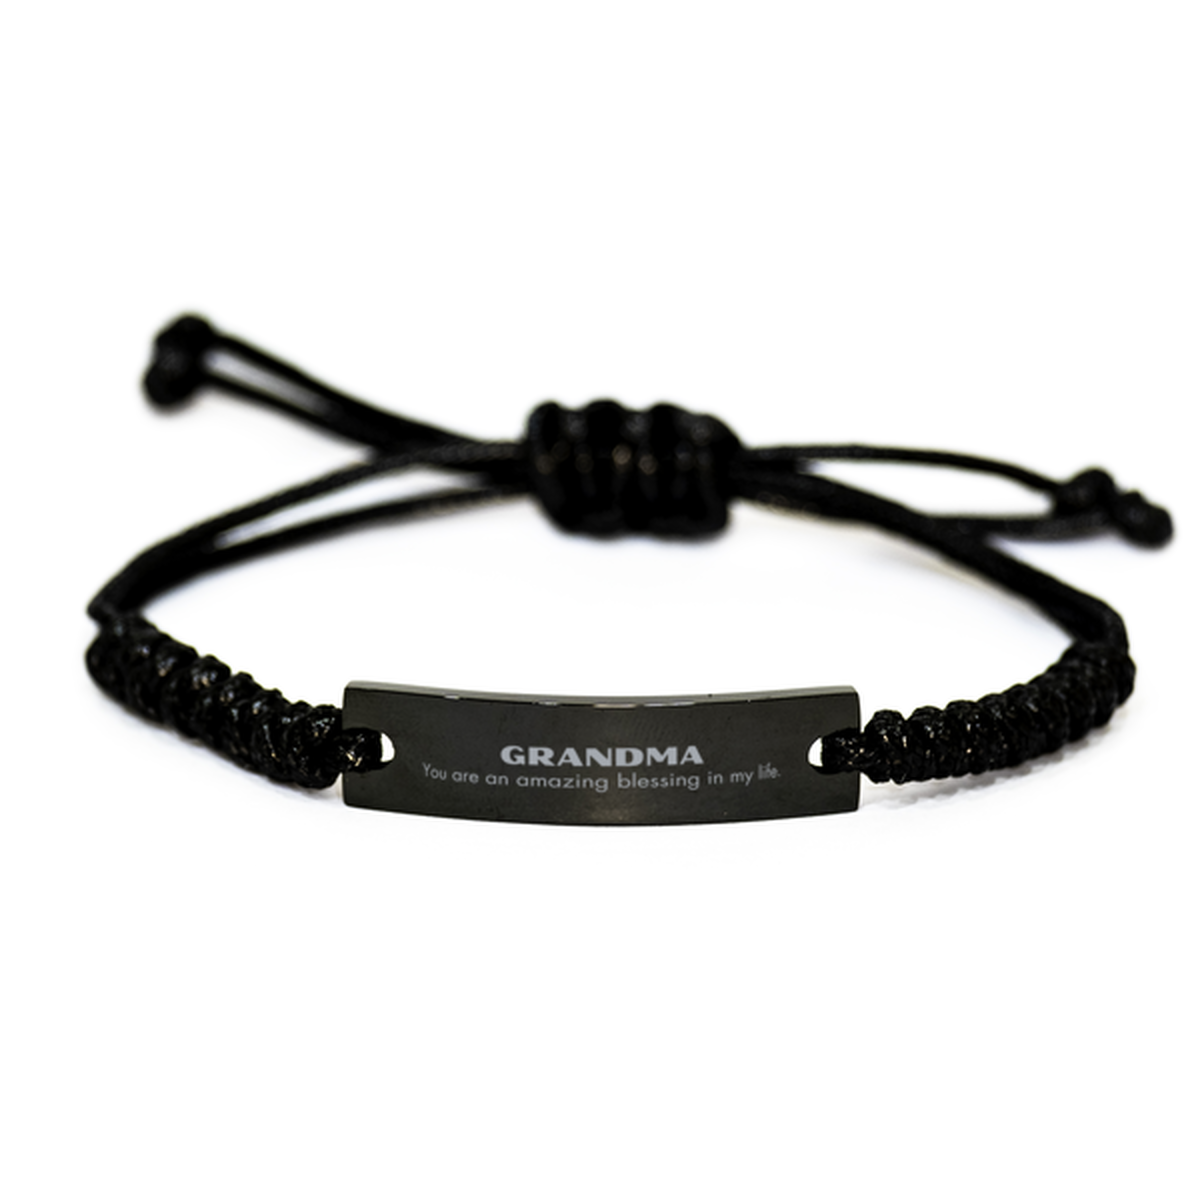 Grandma Black Rope Bracelet, You are an amazing blessing in my life, Thank You Gifts For Grandma, Inspirational Birthday Christmas Unique Gifts For Grandma